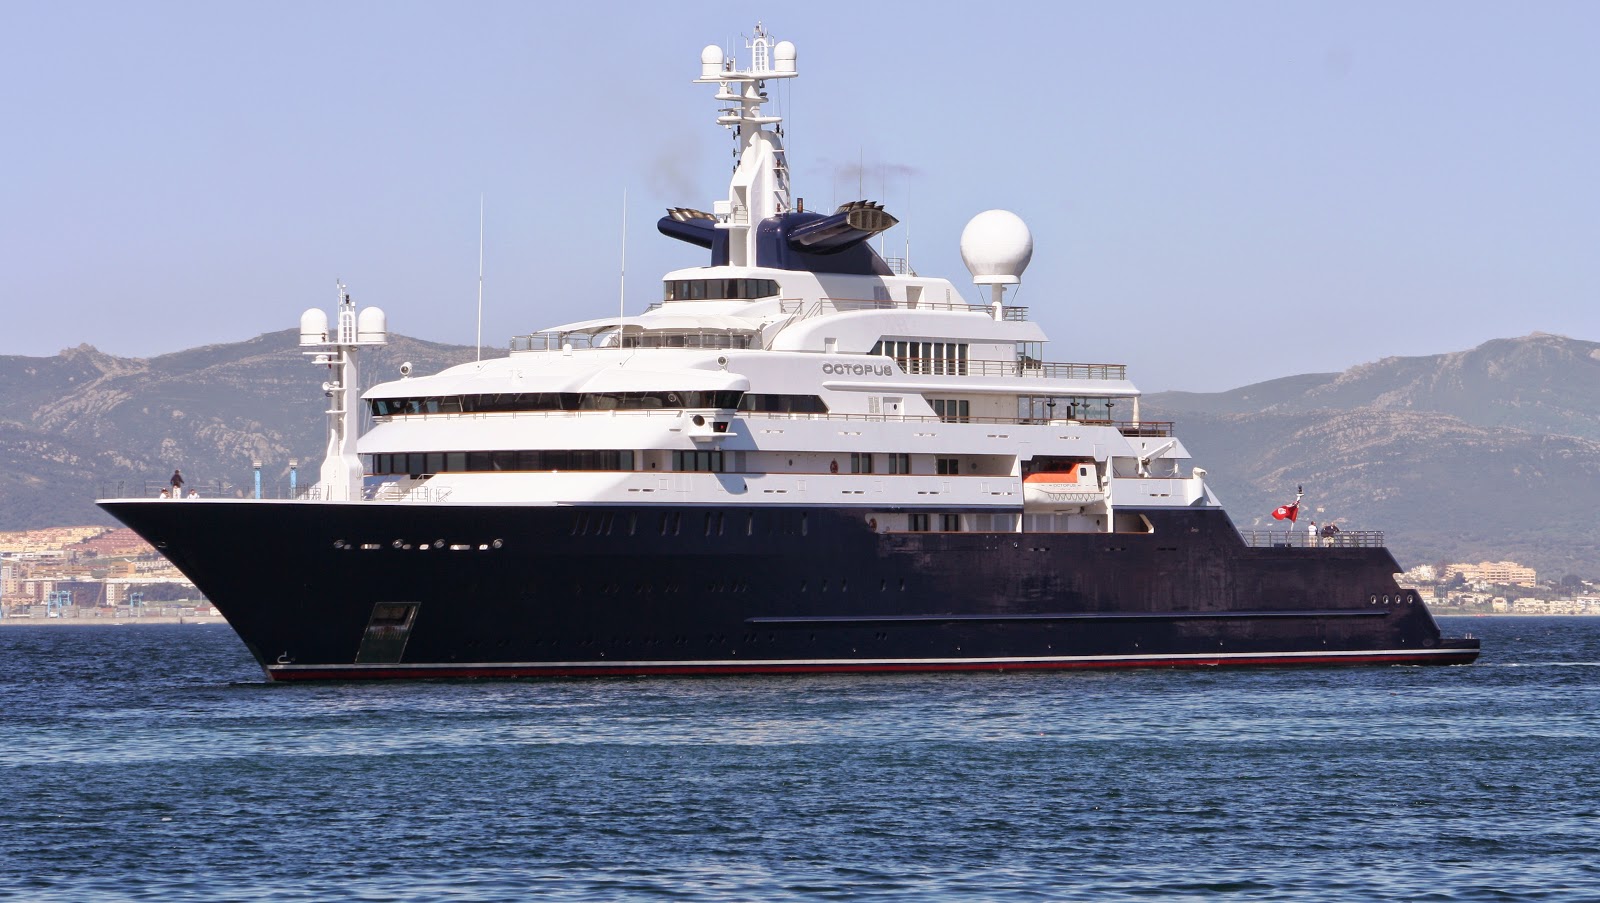 the Octopus and big luxurious yachts